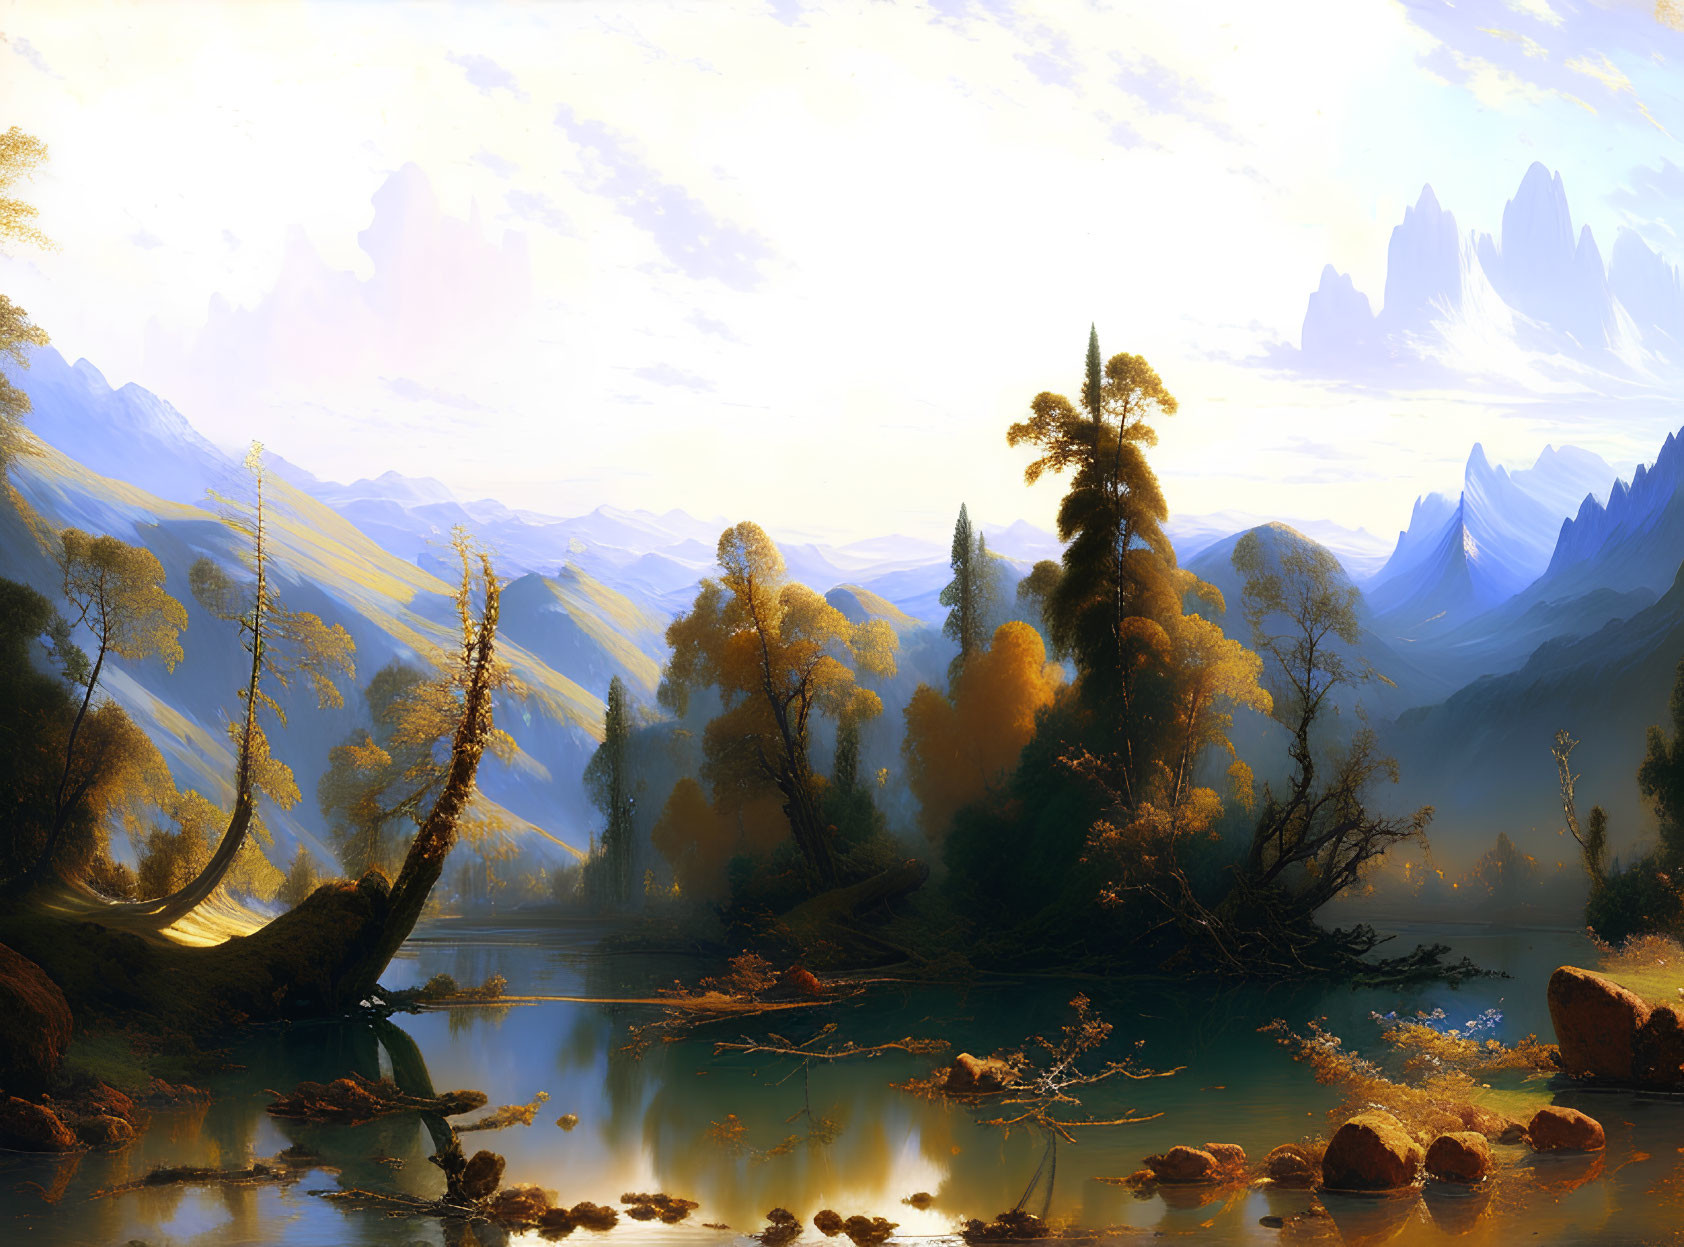 Tranquil landscape painting of serene lake, lush trees, golden hues, mountains, hazy sky